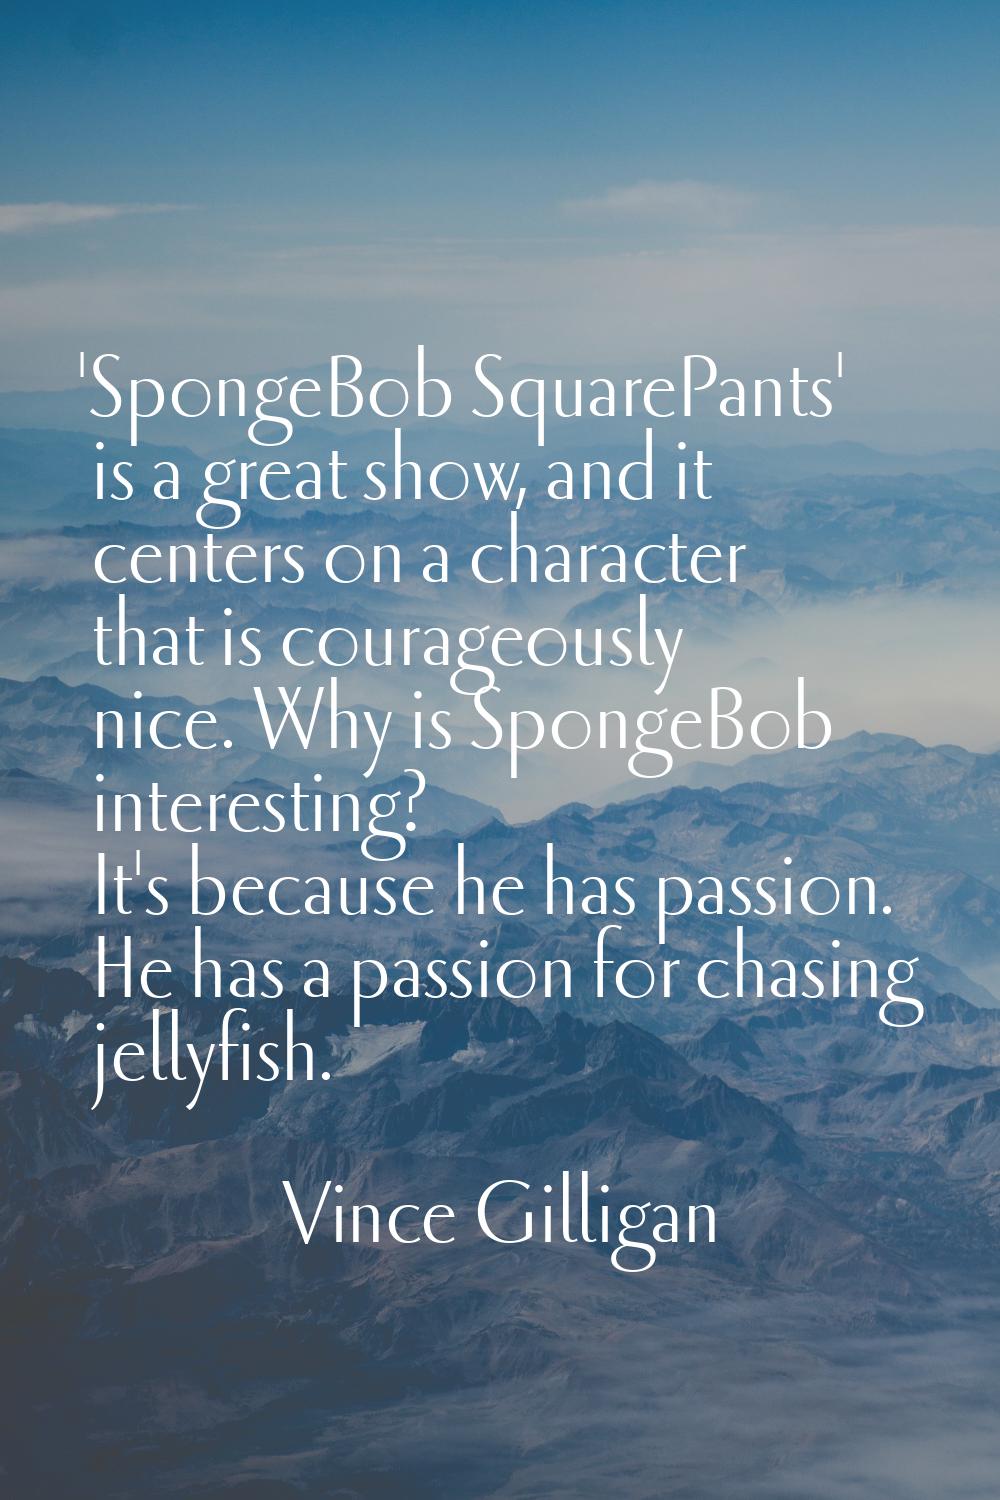 'SpongeBob SquarePants' is a great show, and it centers on a character that is courageously nice. W